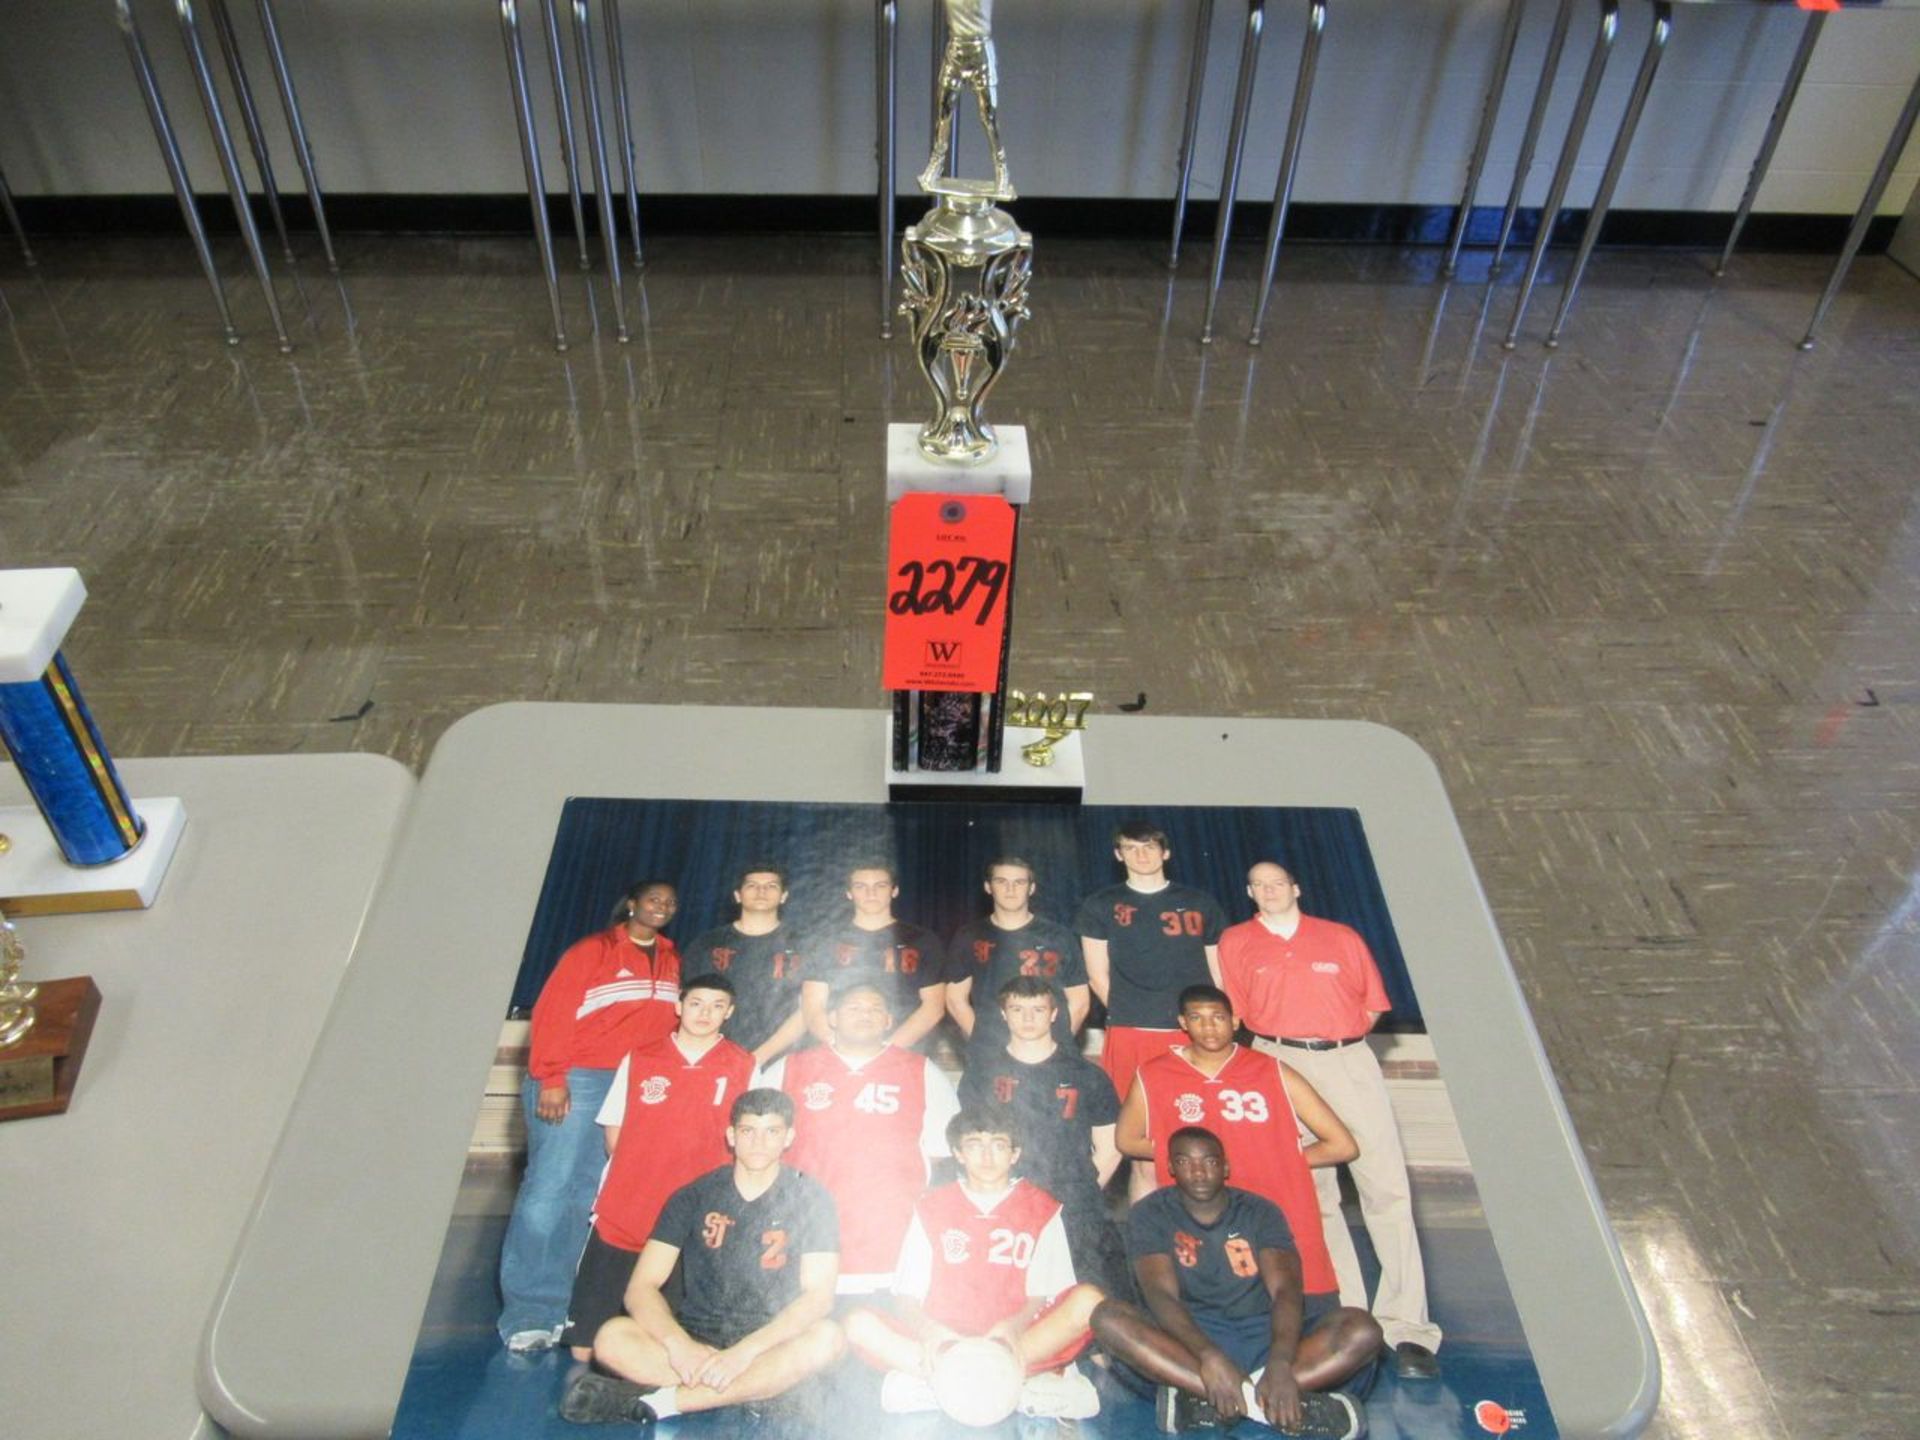 2007 HT Tiger Boy's Volleyball Invite Consolition Champion Trophy with Team Photo (Room 306)